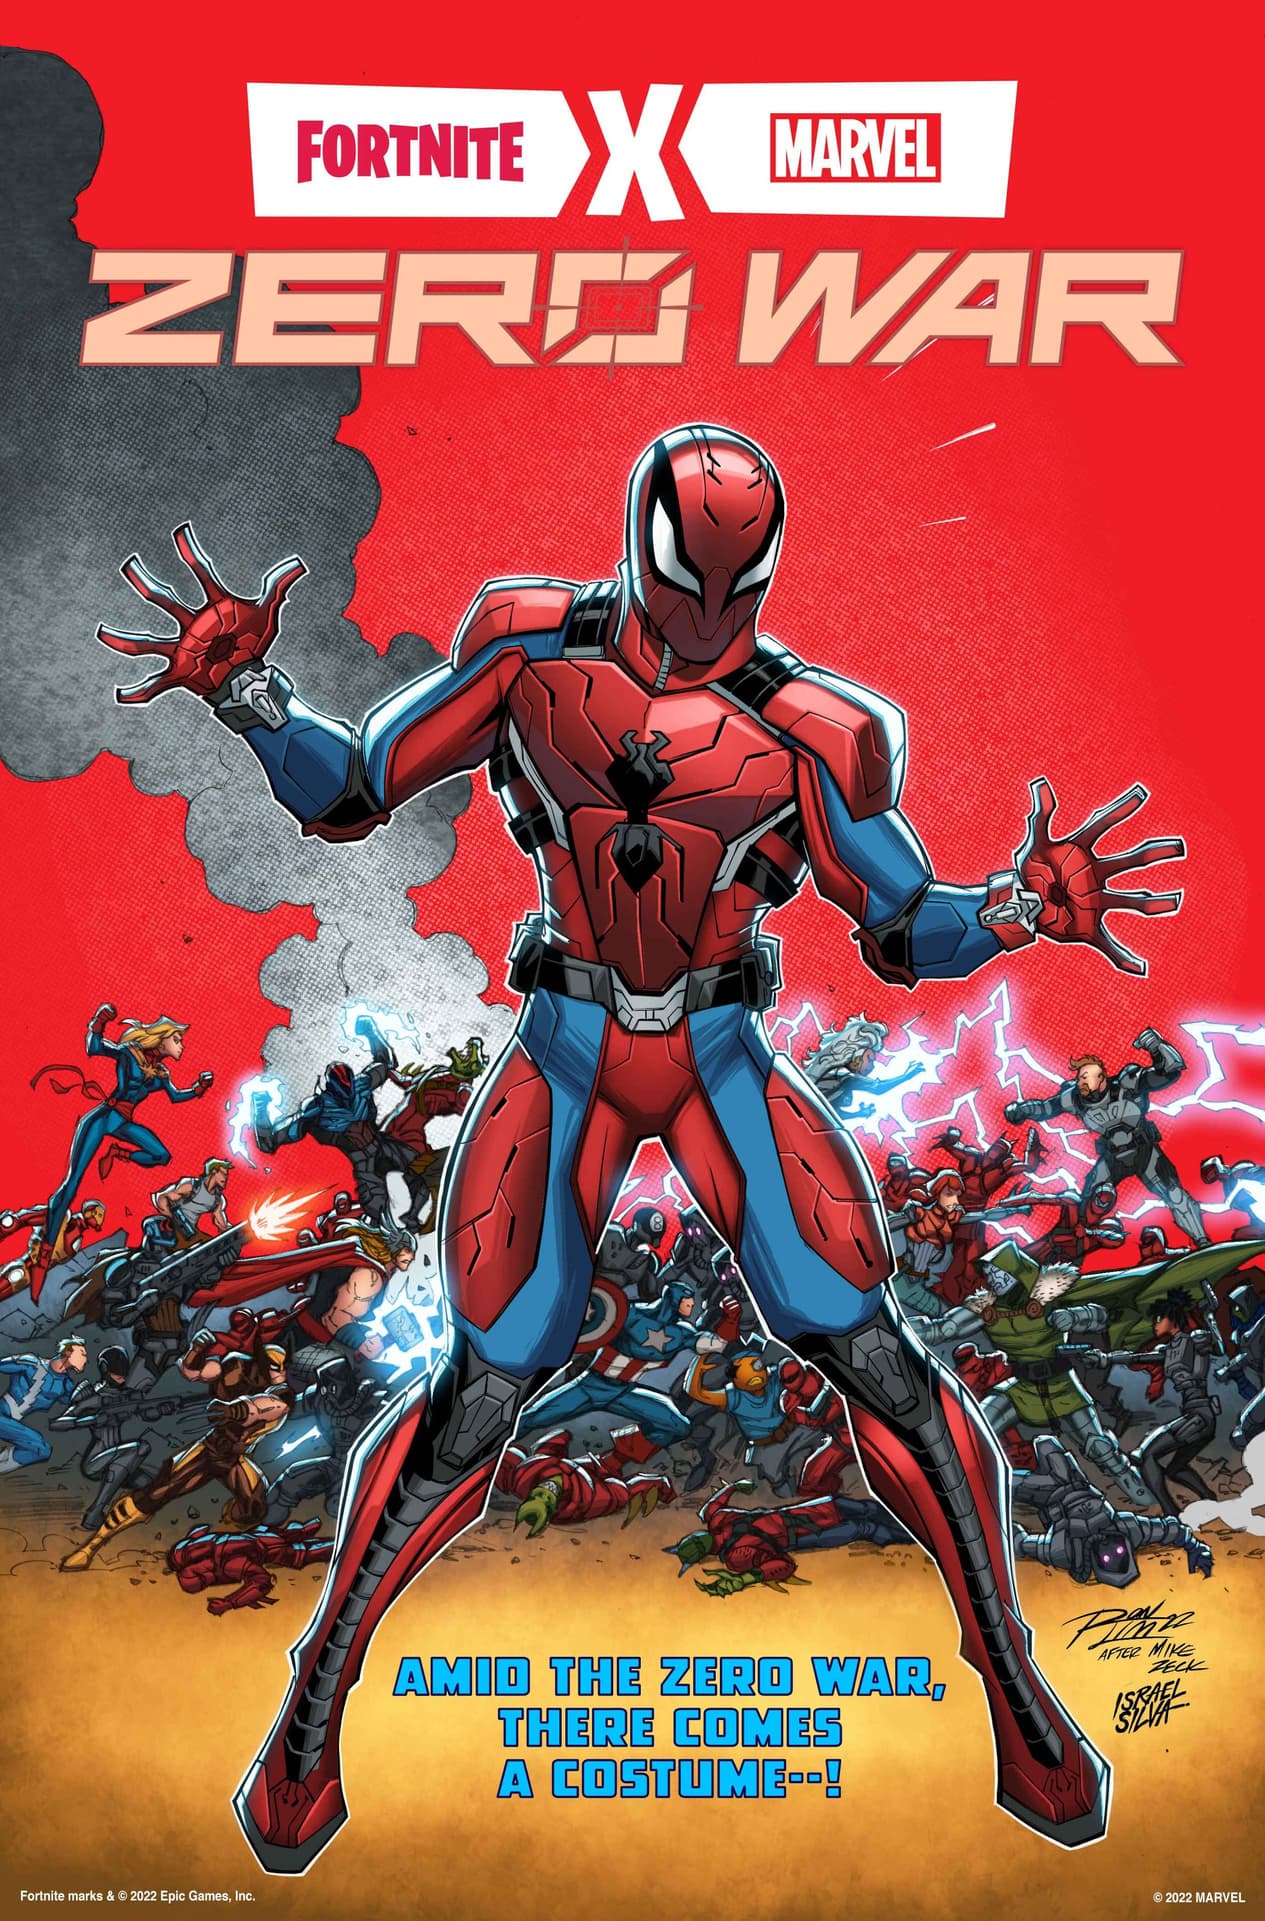 FORTNITE X MARVEL: ZERO WAR promotional image by Ron Lim and Israel Silva